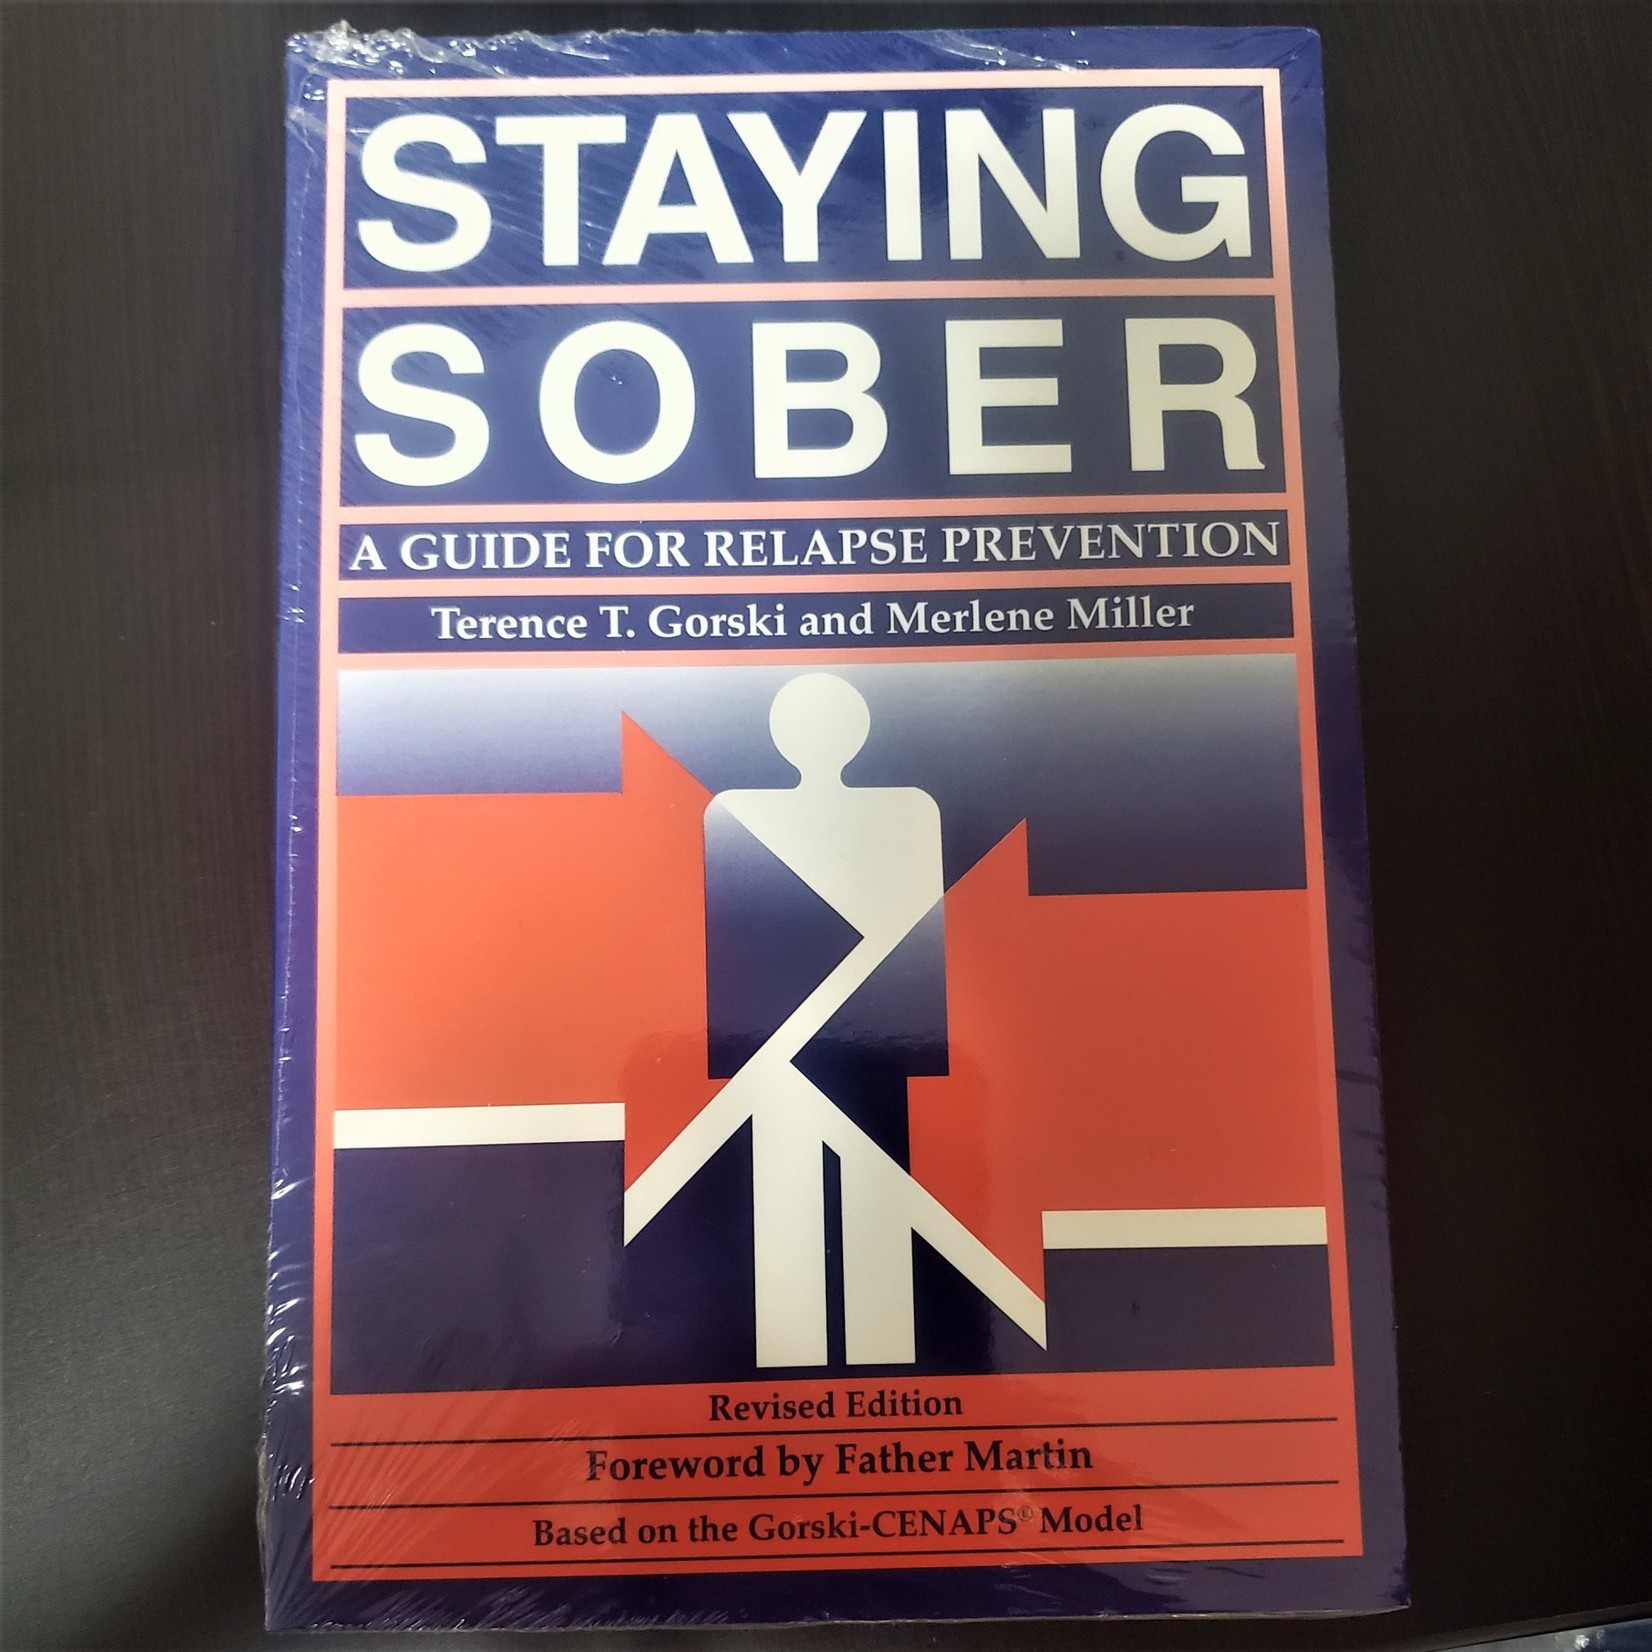 Staying Sober [A Guide for Relapse Prevention]